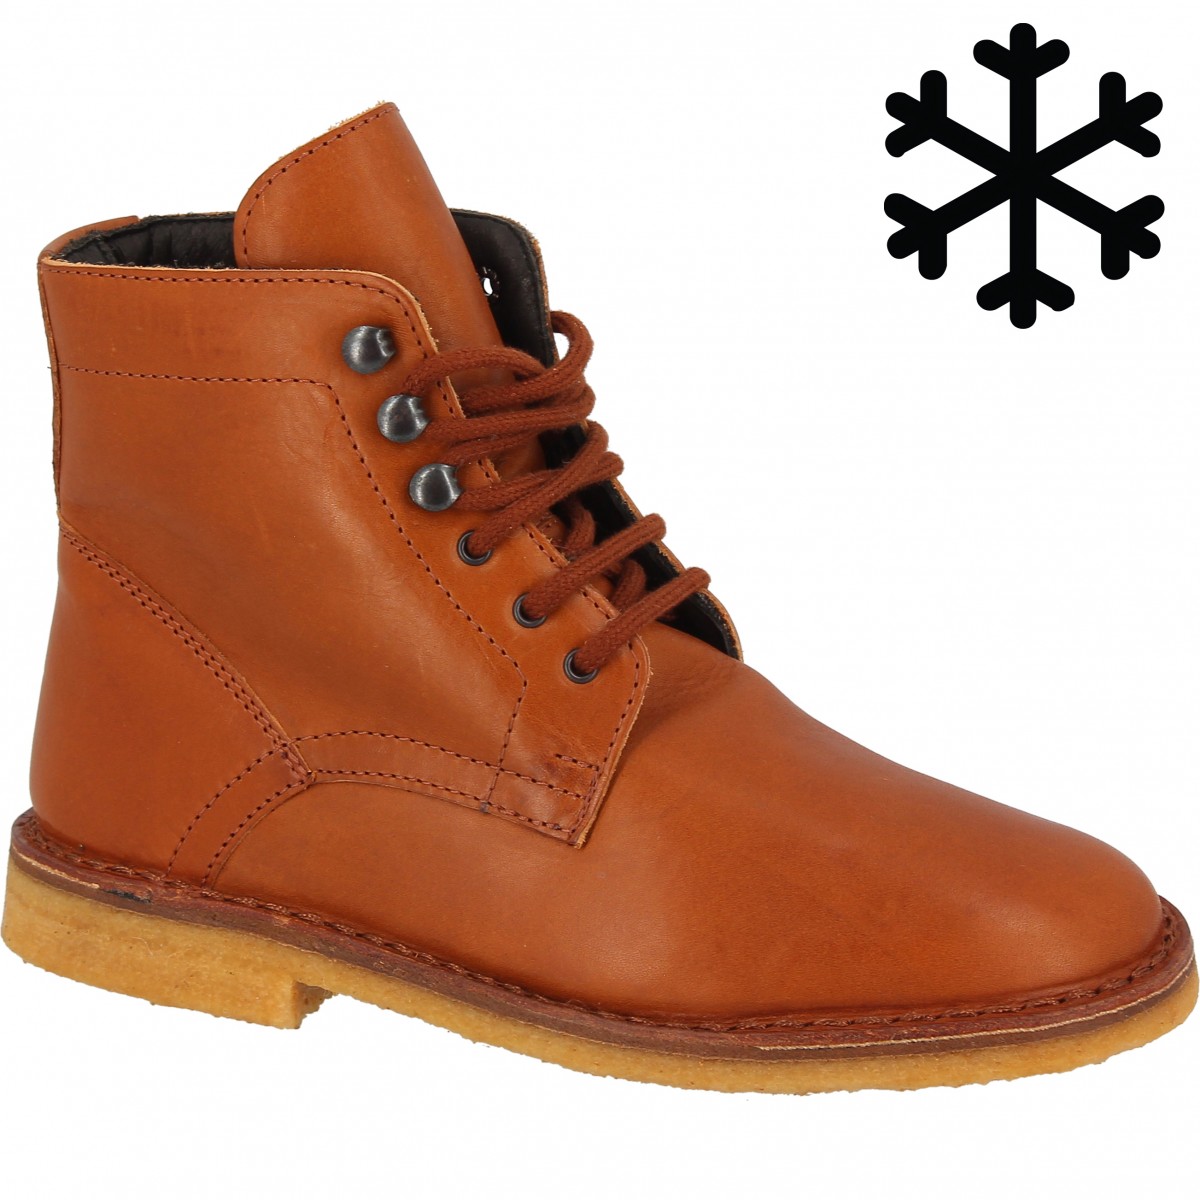 Men's tan leather ankle boots with winter lining | The leather craftsmen